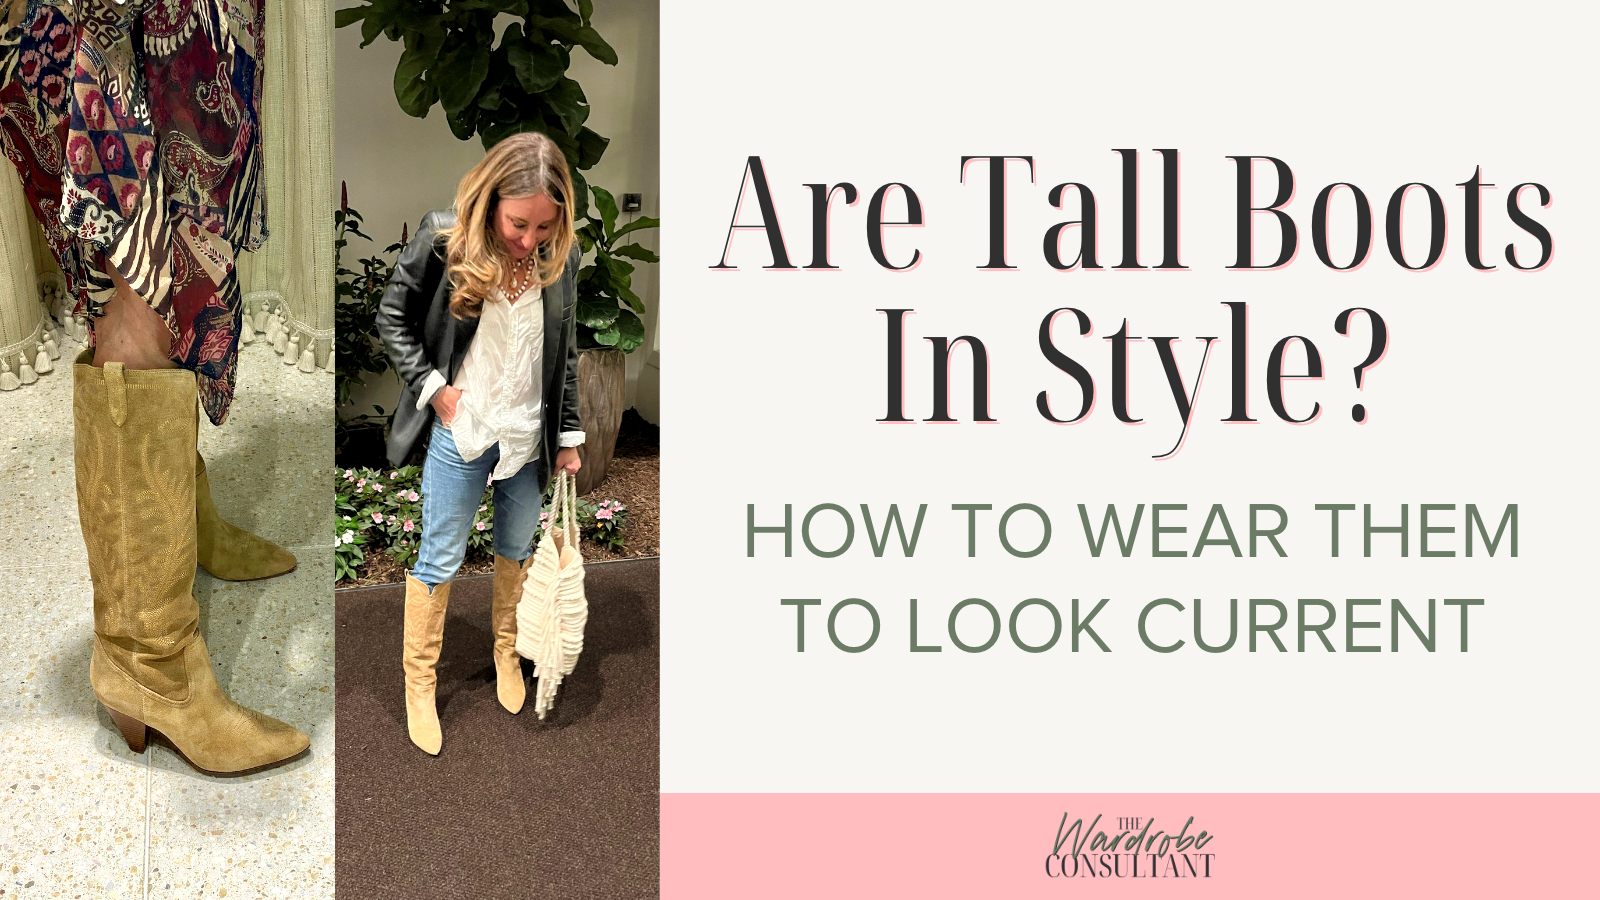 10 Stylish and Comfortable Boots for Older Women